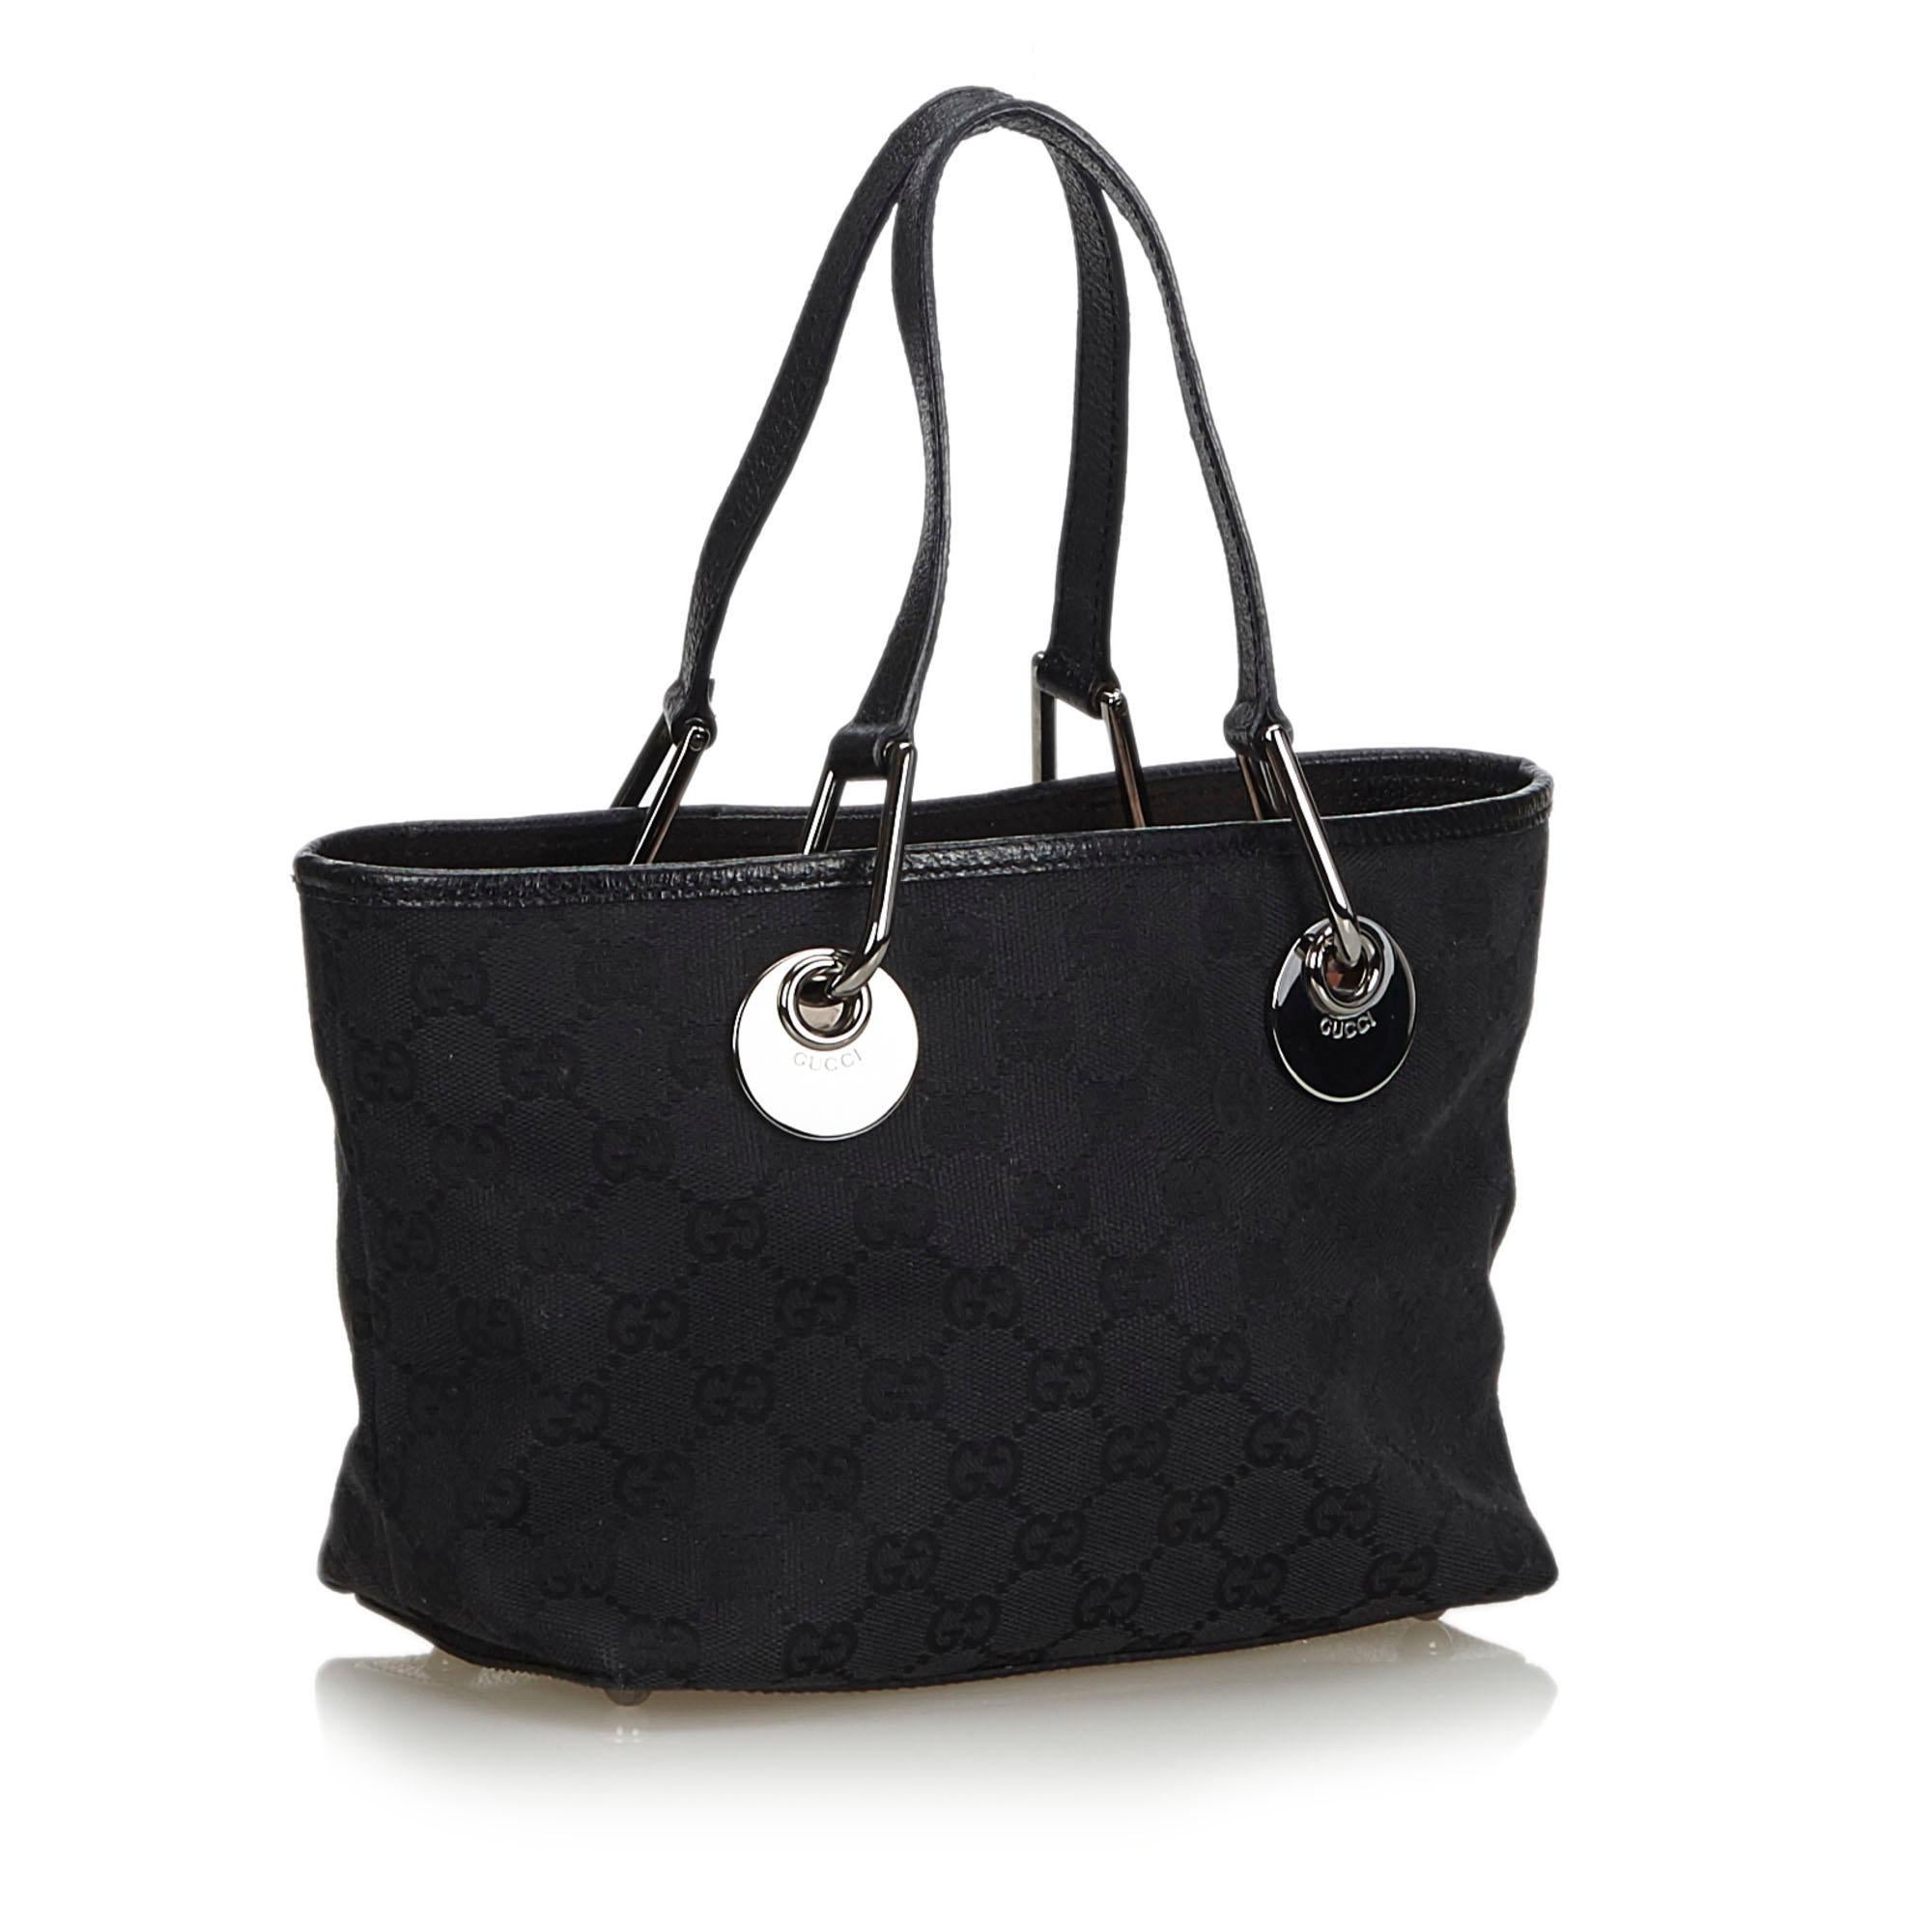 The Eclipse tote bag features a canvas body with leather trim, flat leather straps with a silver-tone hardware, an open top, and interior zip and slip pockets. It carries as AB condition rating.

Inclusions: 
Dust Bag

Dimensions:
Length: 16.00